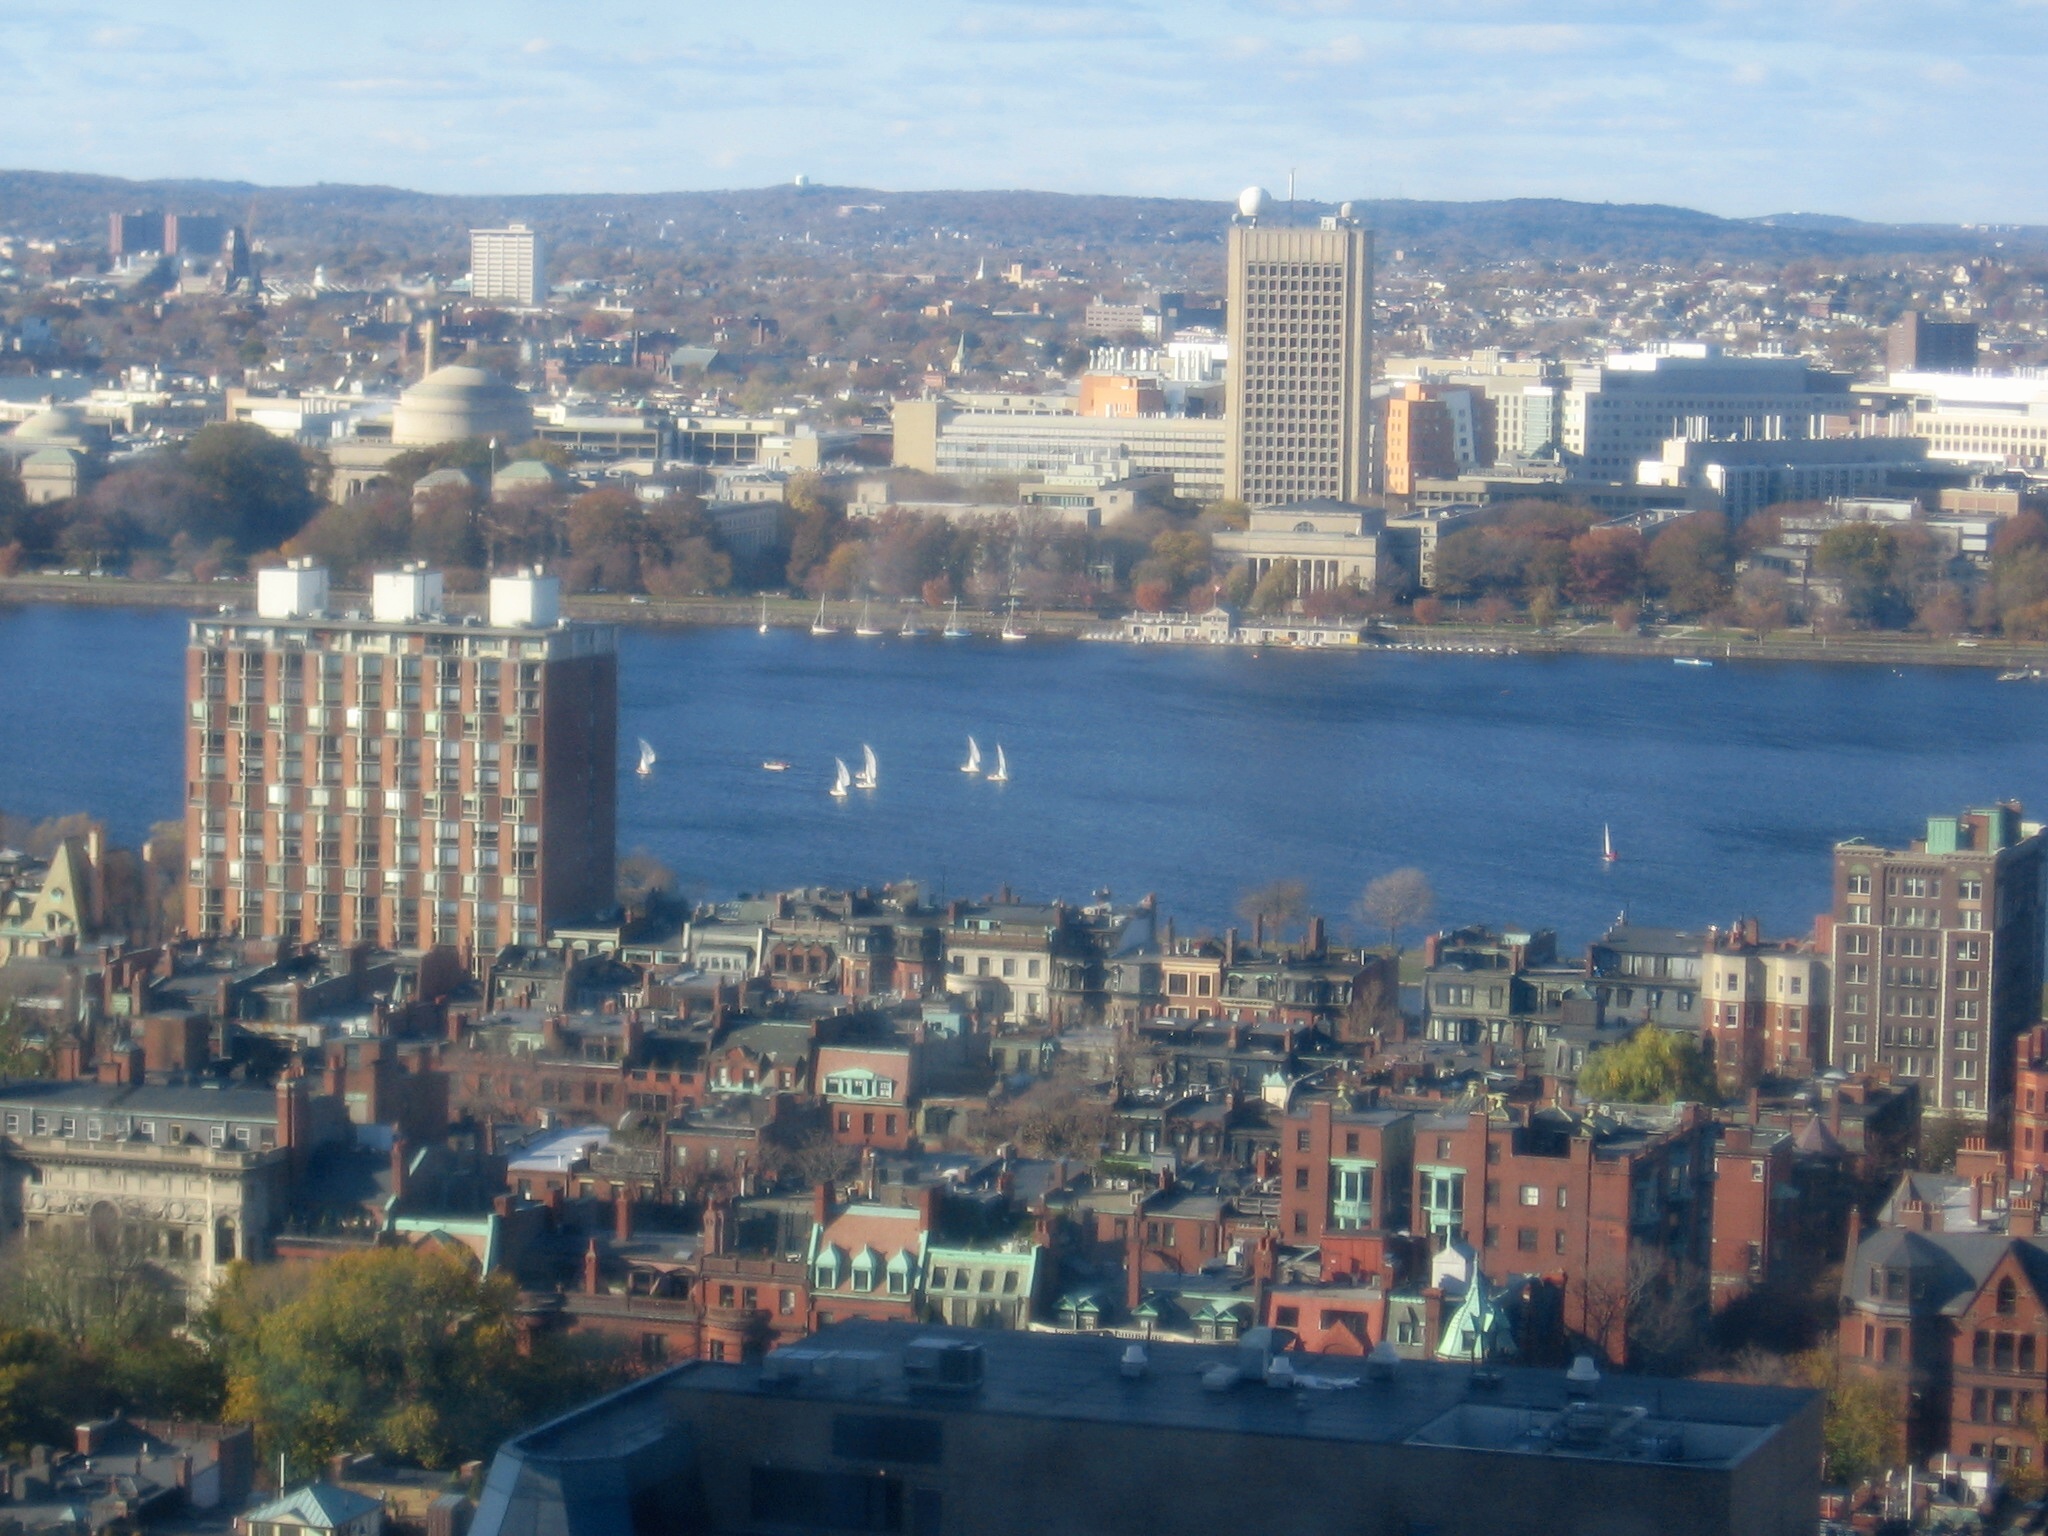 View of Charles River (user submitted)